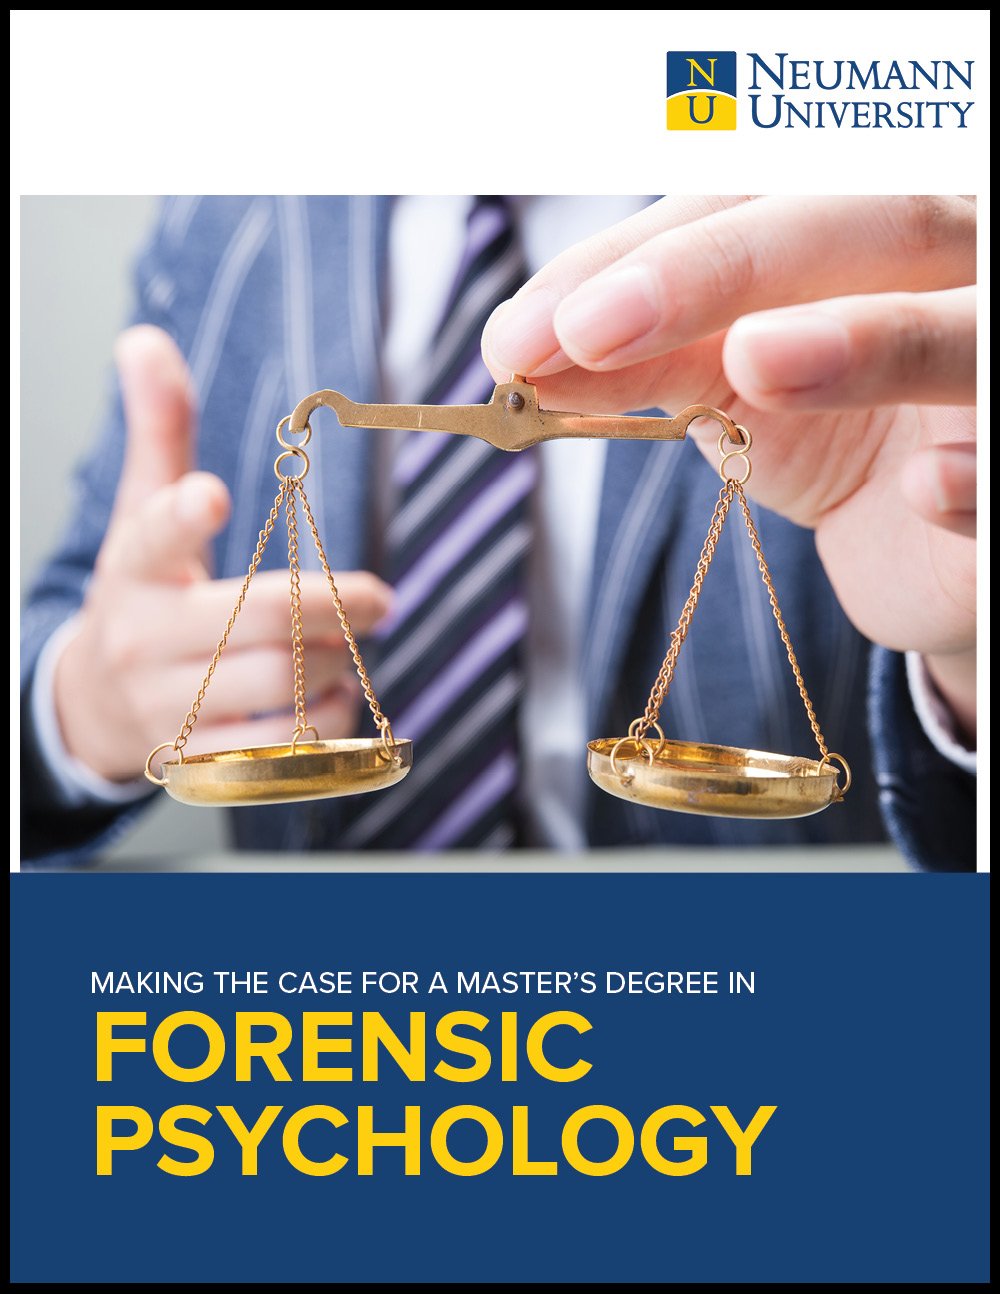 phd in forensic psychology online